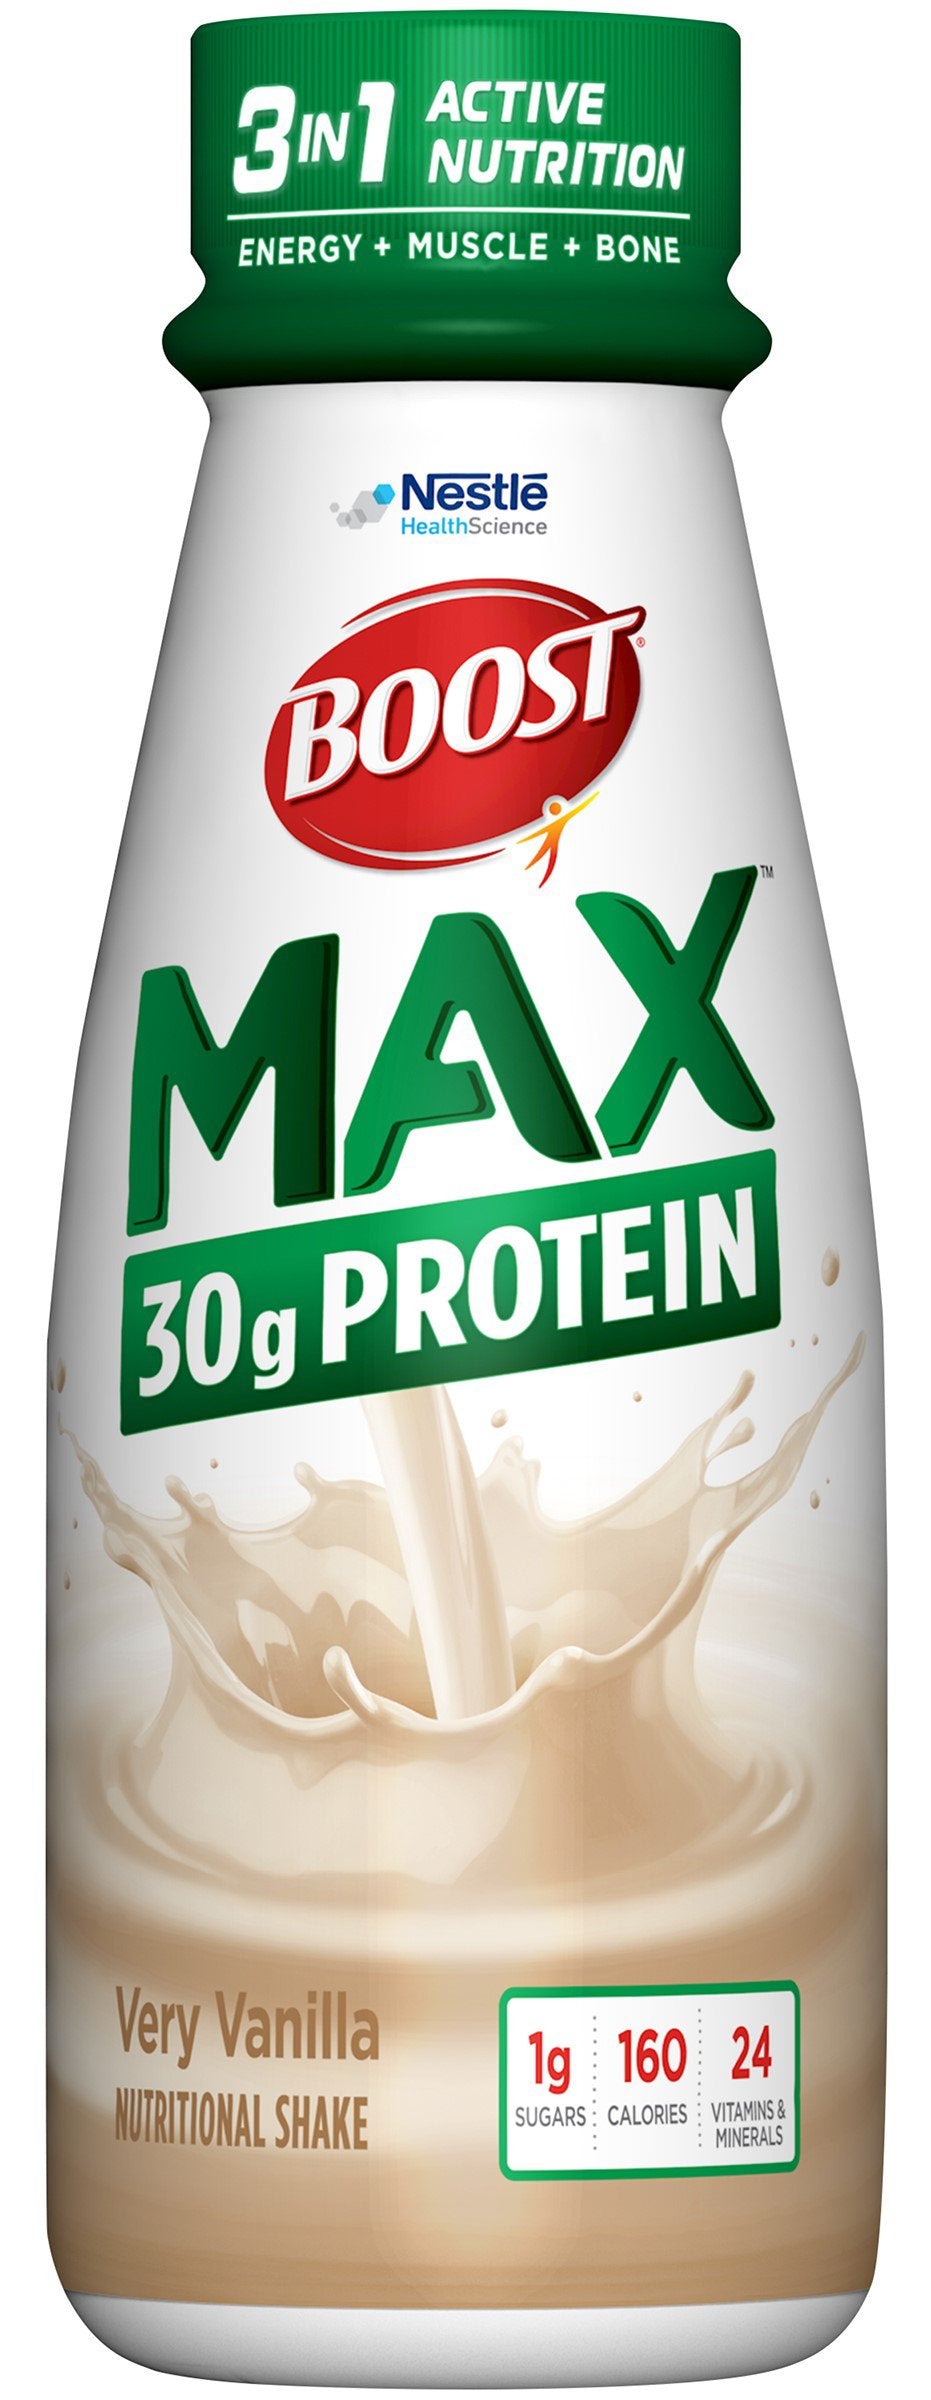  Oral Protein Supplement Boost® Max Very Vanilla Flavor Ready to Use 11 oz. Bottle 